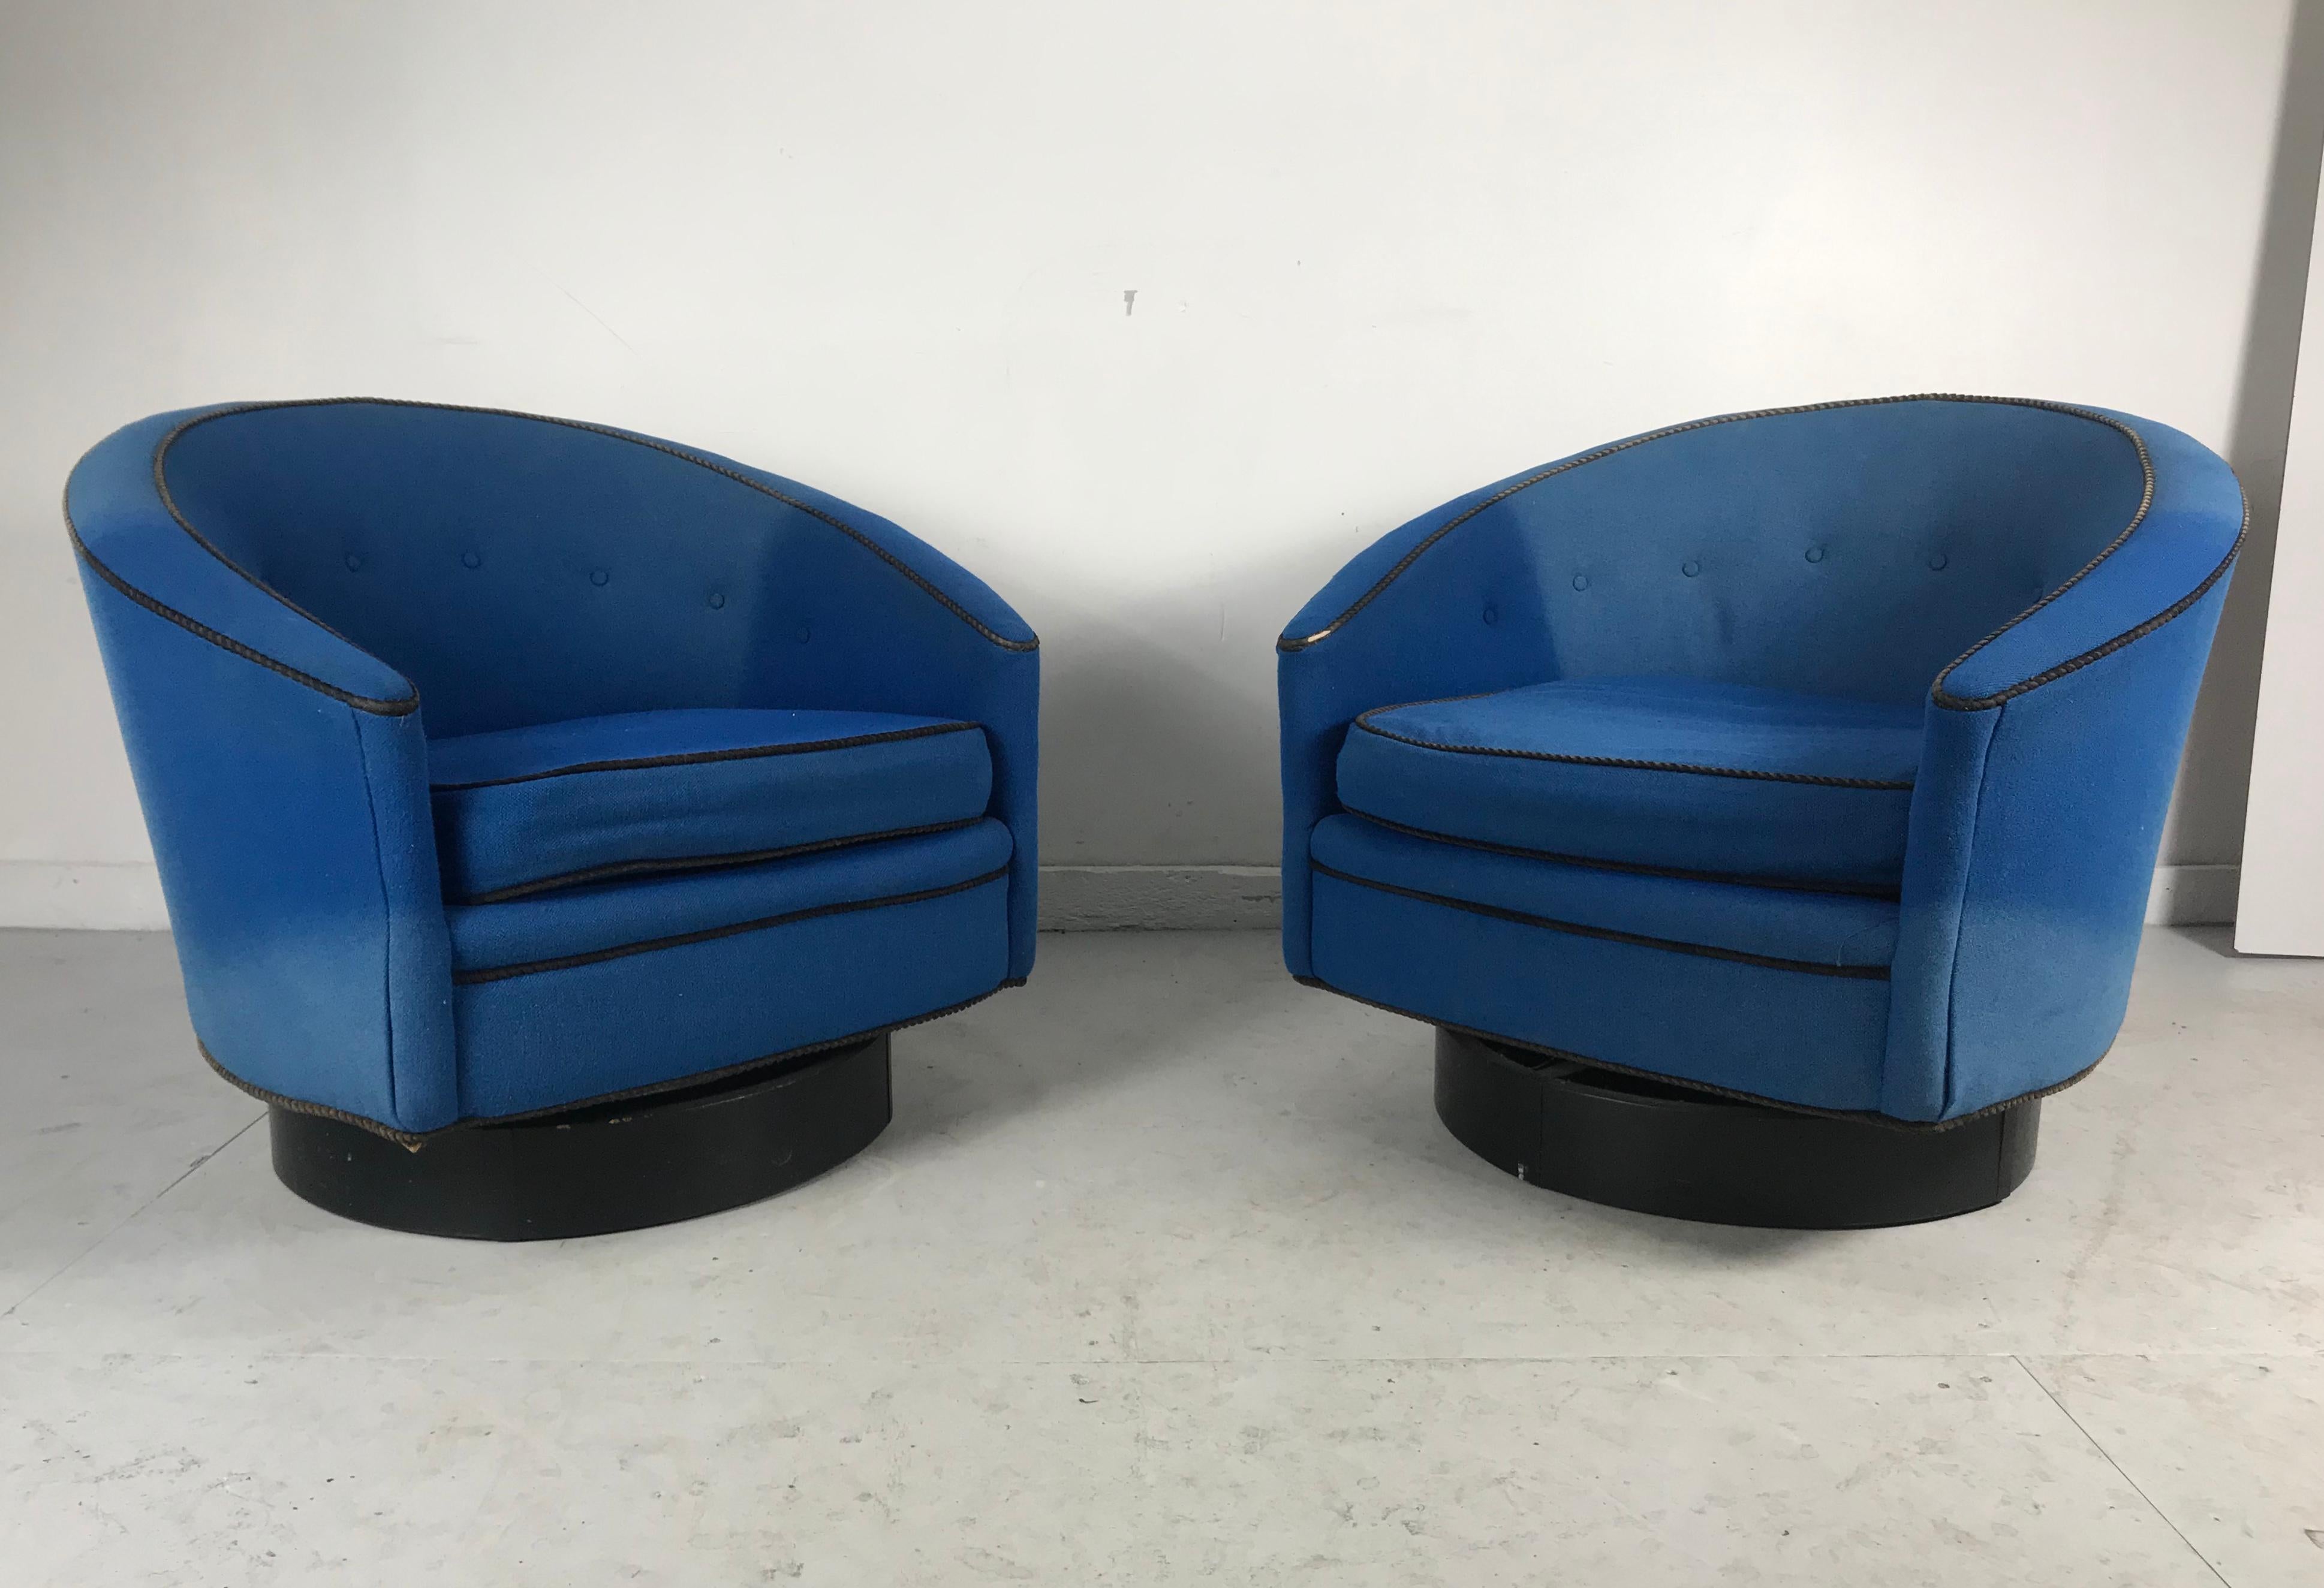 Stunning pair of Modern Regency swivel lounge chairs designed by Lawrence Peabody, Richardson Nemschoff, retain original Nemschoff Chairs label, Classic sleek, elegant modernist design, original quality blue wool upholstery, some fading and interior